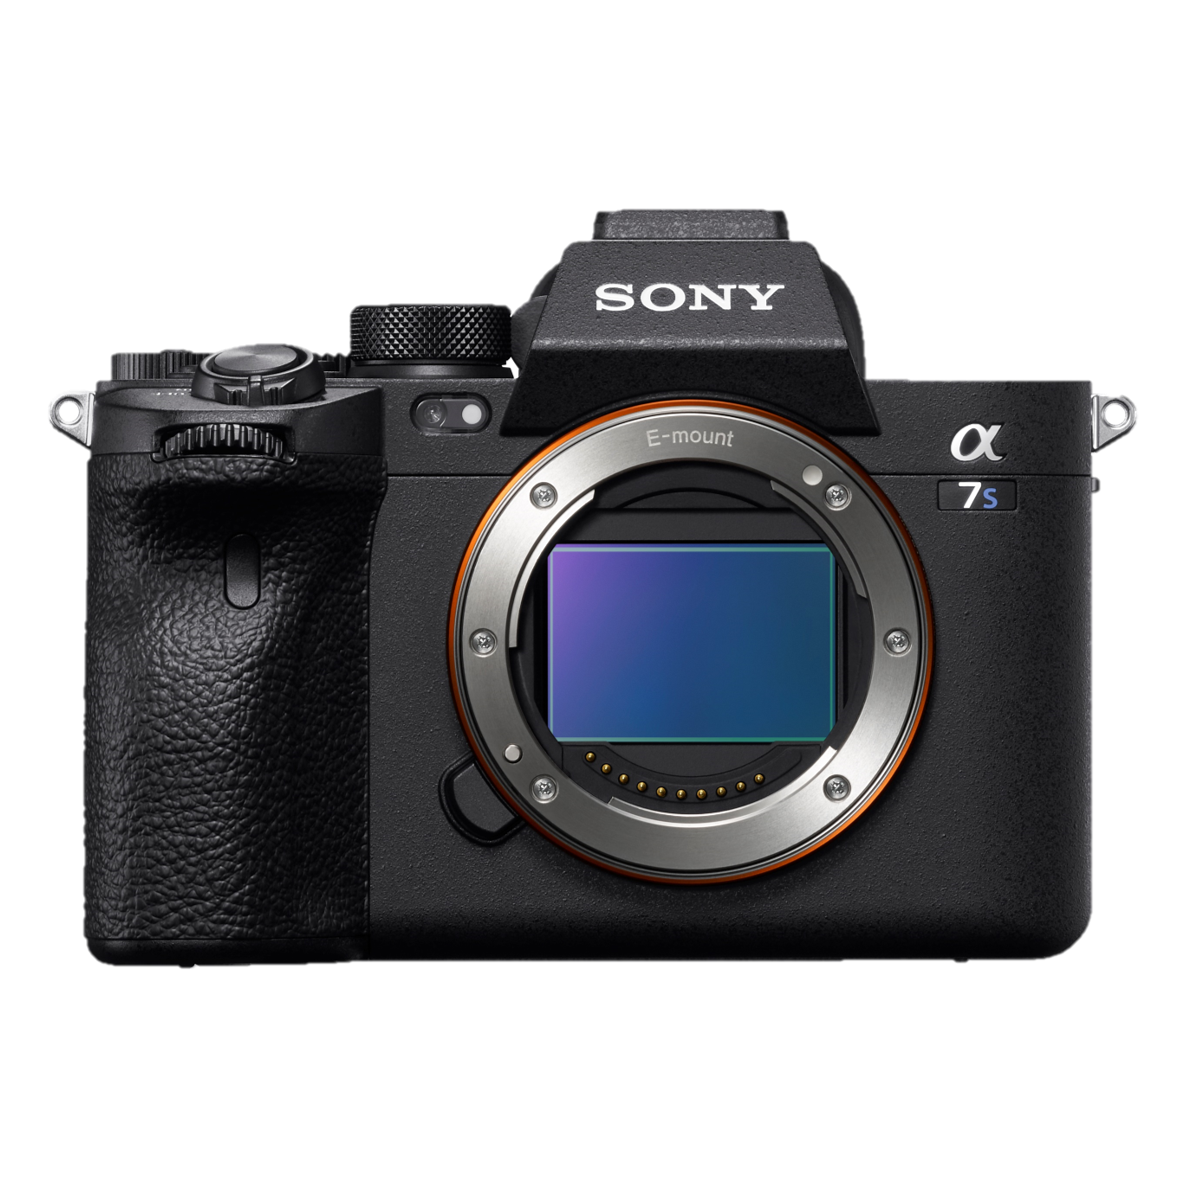 Sony Alpha 7S III | A7S III | ILCE-7SM3 Camera Image, Front View Angle, Newly developed 12.1-megapixel back-illuminated Exmor R CMOS image sensor.